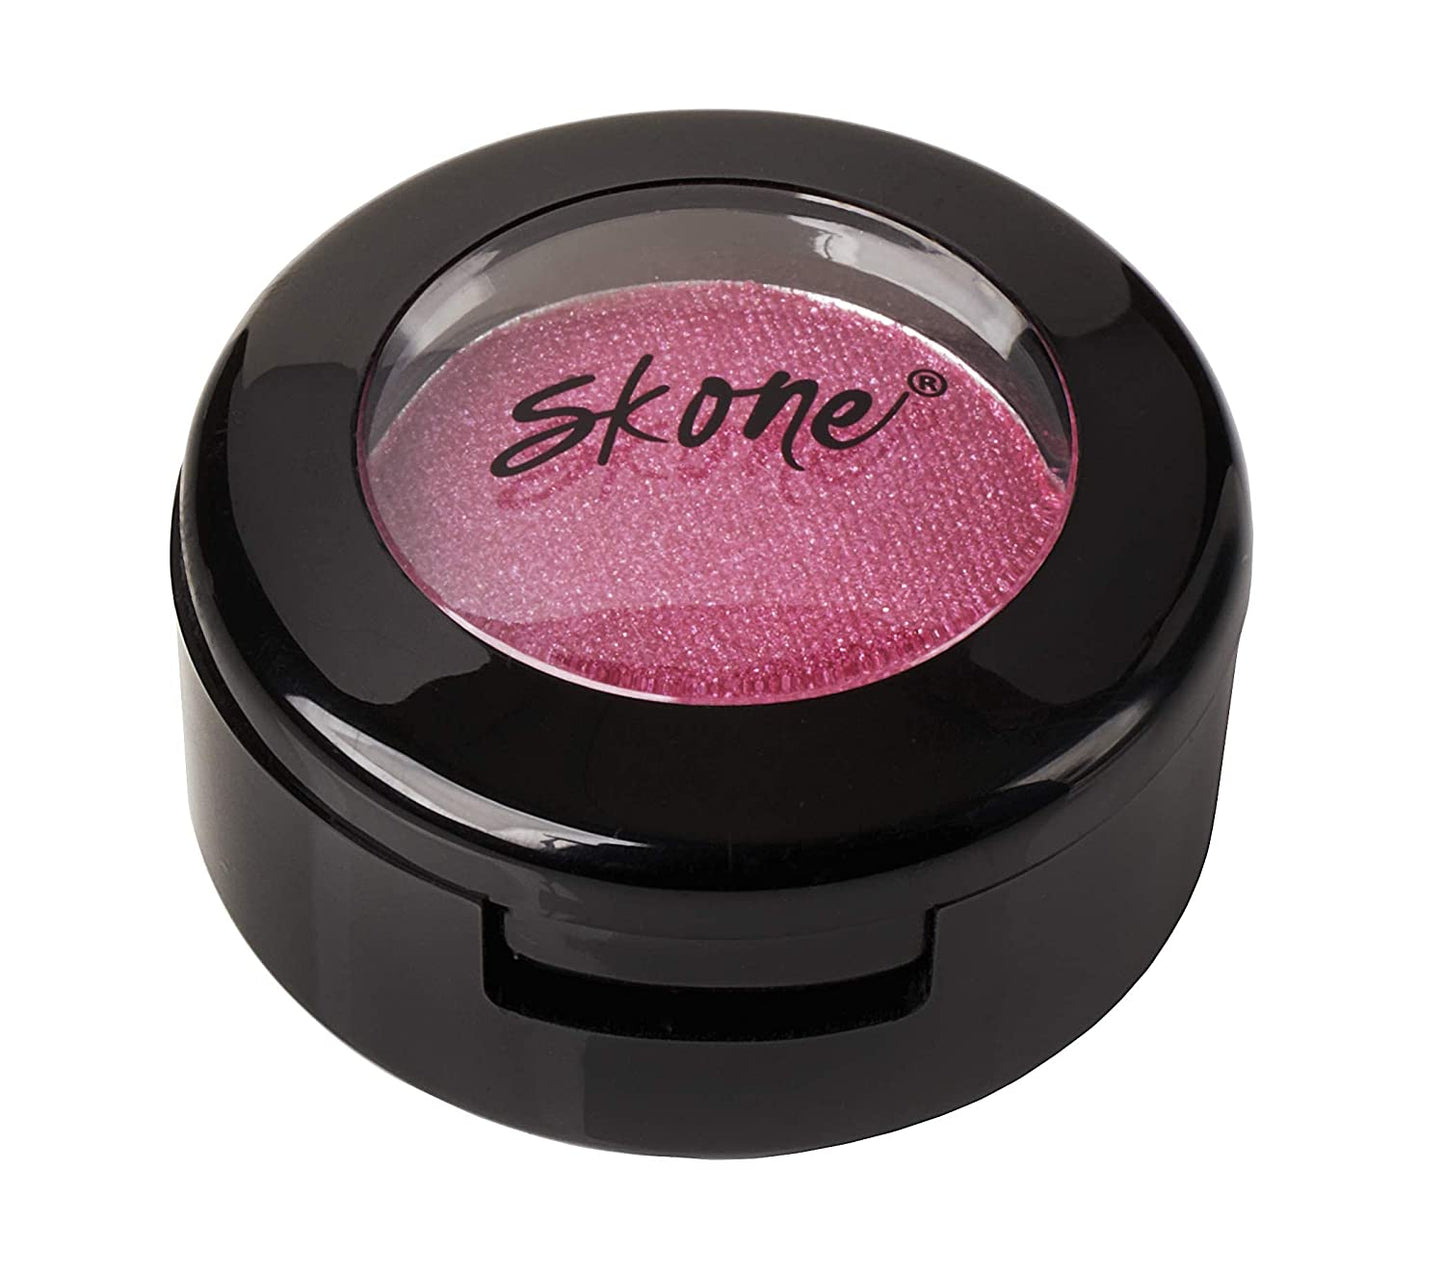 Professional Product Title: "Cosmetics Gems Single Eyeshadow - Highly Pigmented, Longwear Eye Makeup with Pro Shimmery Finish - Ultra-Blendable Shades in Pink and Strawberry"